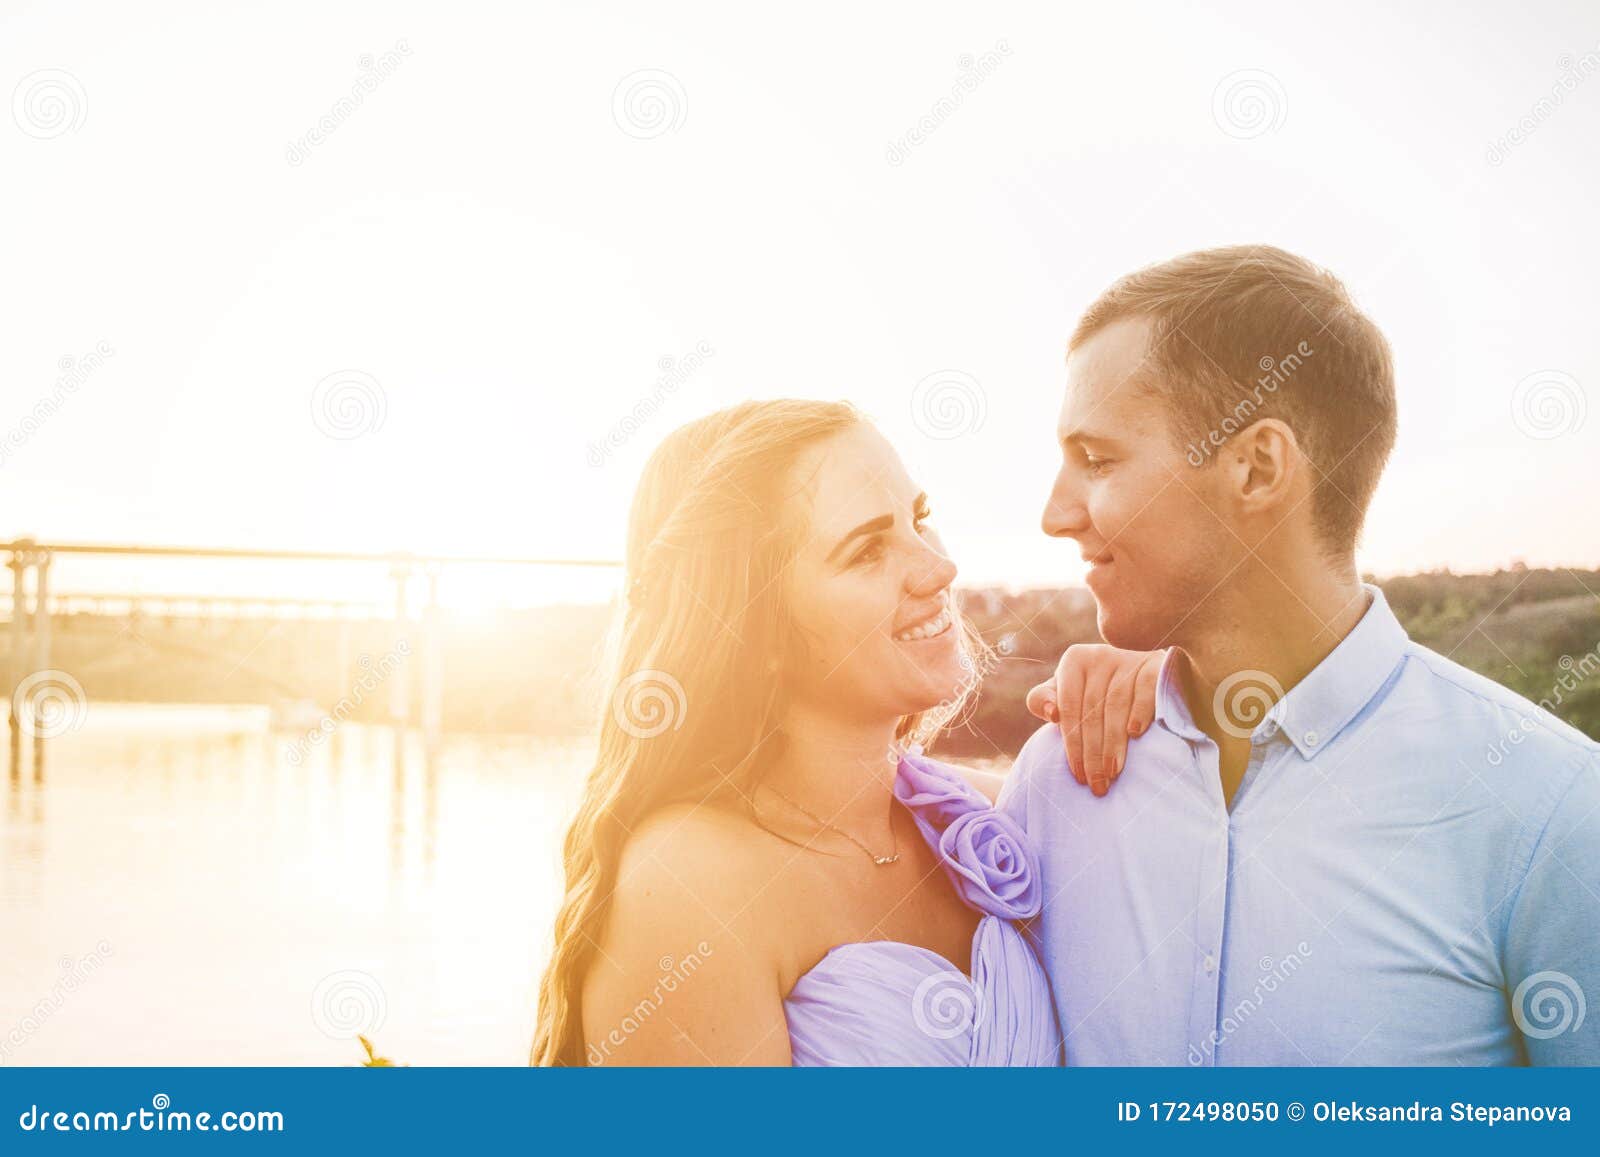 https://thumbs.dreamstime.com/z/young-couple-love-hug-each-other-two-lovers-people-sunset-river-beautiful-woman-man-standing-rock-women-men-172498050.jpg